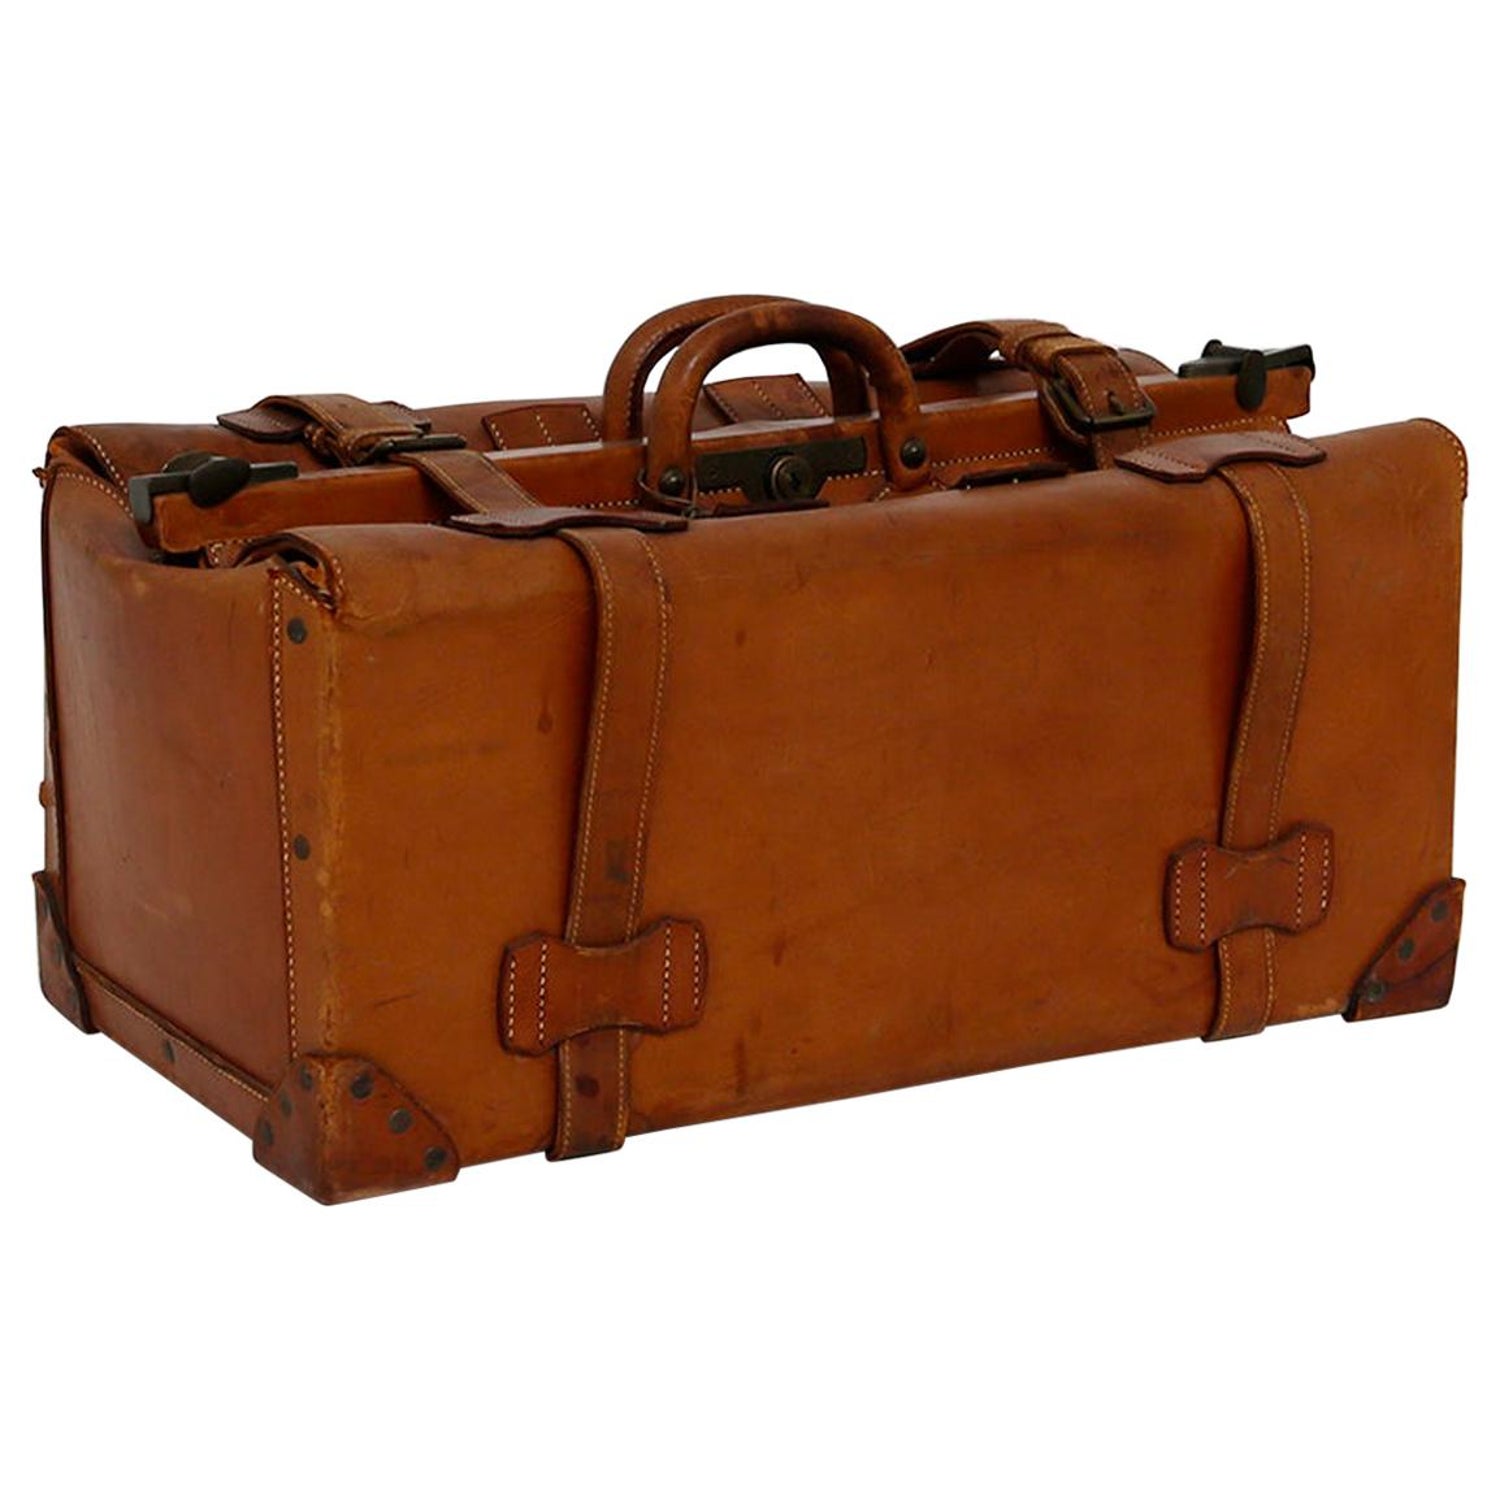 CMR Classic Firearms :: Antique Gladstone Travel Bag. Ref.#.4a.